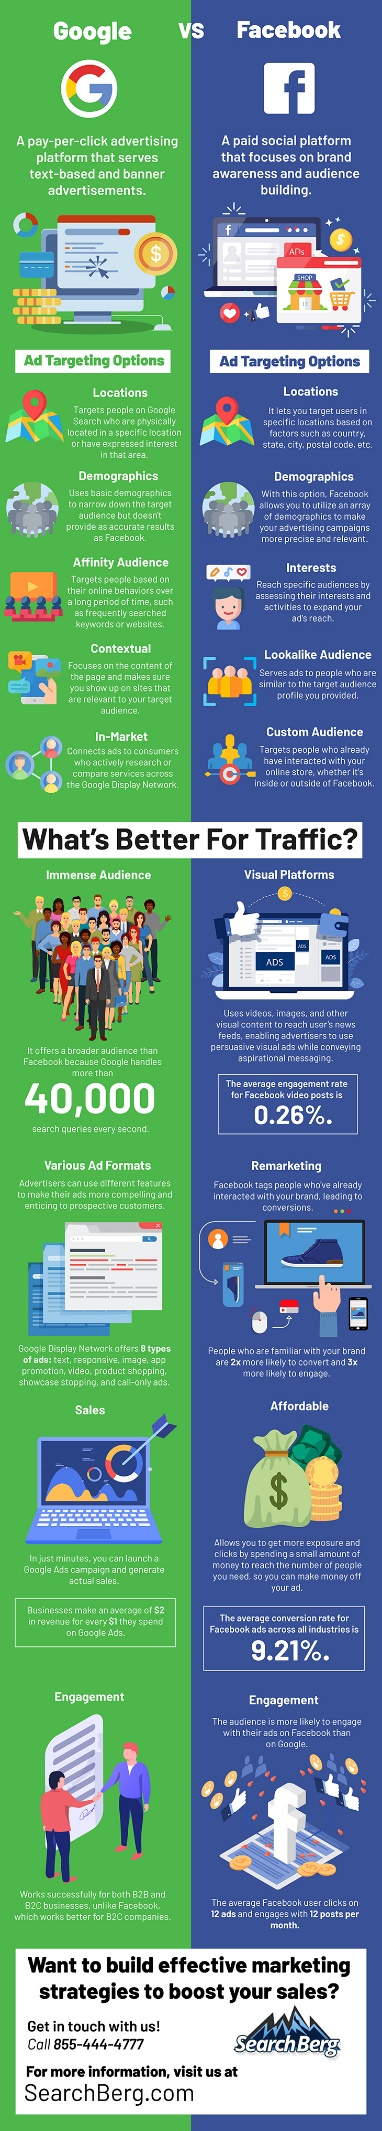 searchberg infographic on seo